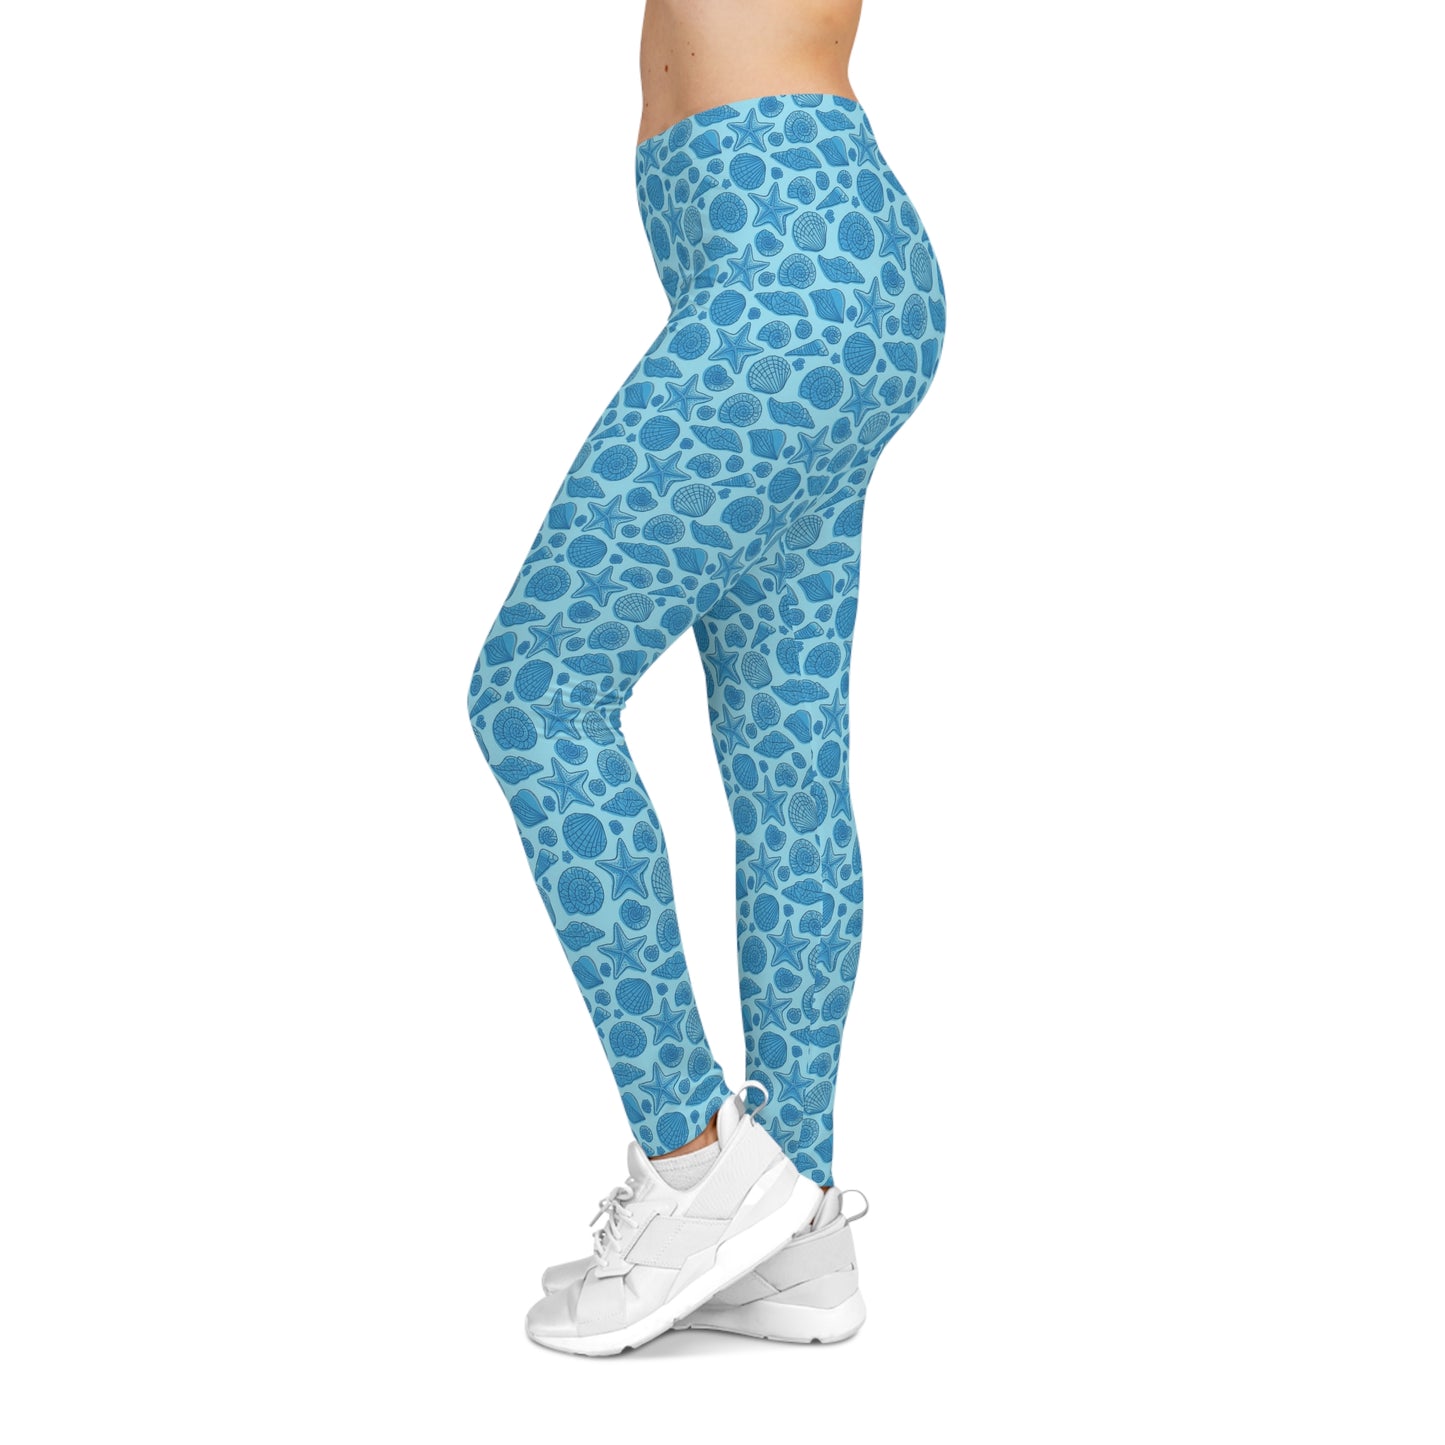 Low Waist Mermaid Dreams Leggings - Blue with Starfish and Seashell Print - Women's Casual Wear, Gym, Yoga, Workout, Beach, Party Pants